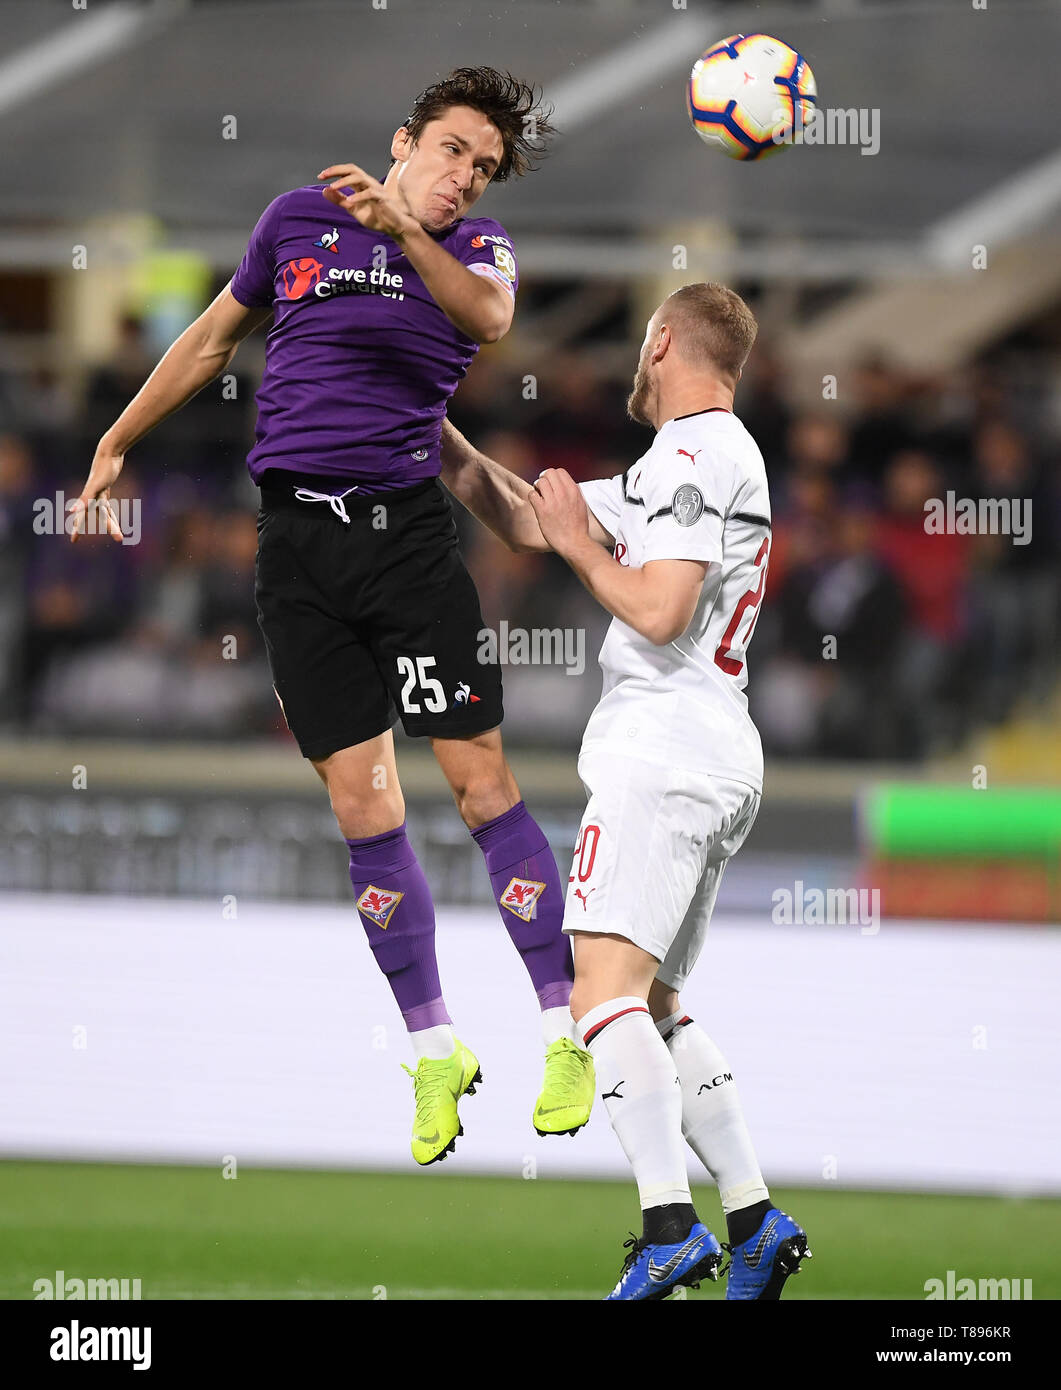 Florence, Italy. 11th May, 2019. AC Milan's Ignazio Abate (R) vies with Fiorentina's Federico Chiesa during a Serie A soccer match between Fiorentina and AC Milan in Florence, Italy, May. 11, 2019. Fiorentina lost 0-1. Credit: Alberto Lingria/Xinhua/Alamy Live News Stock Photo